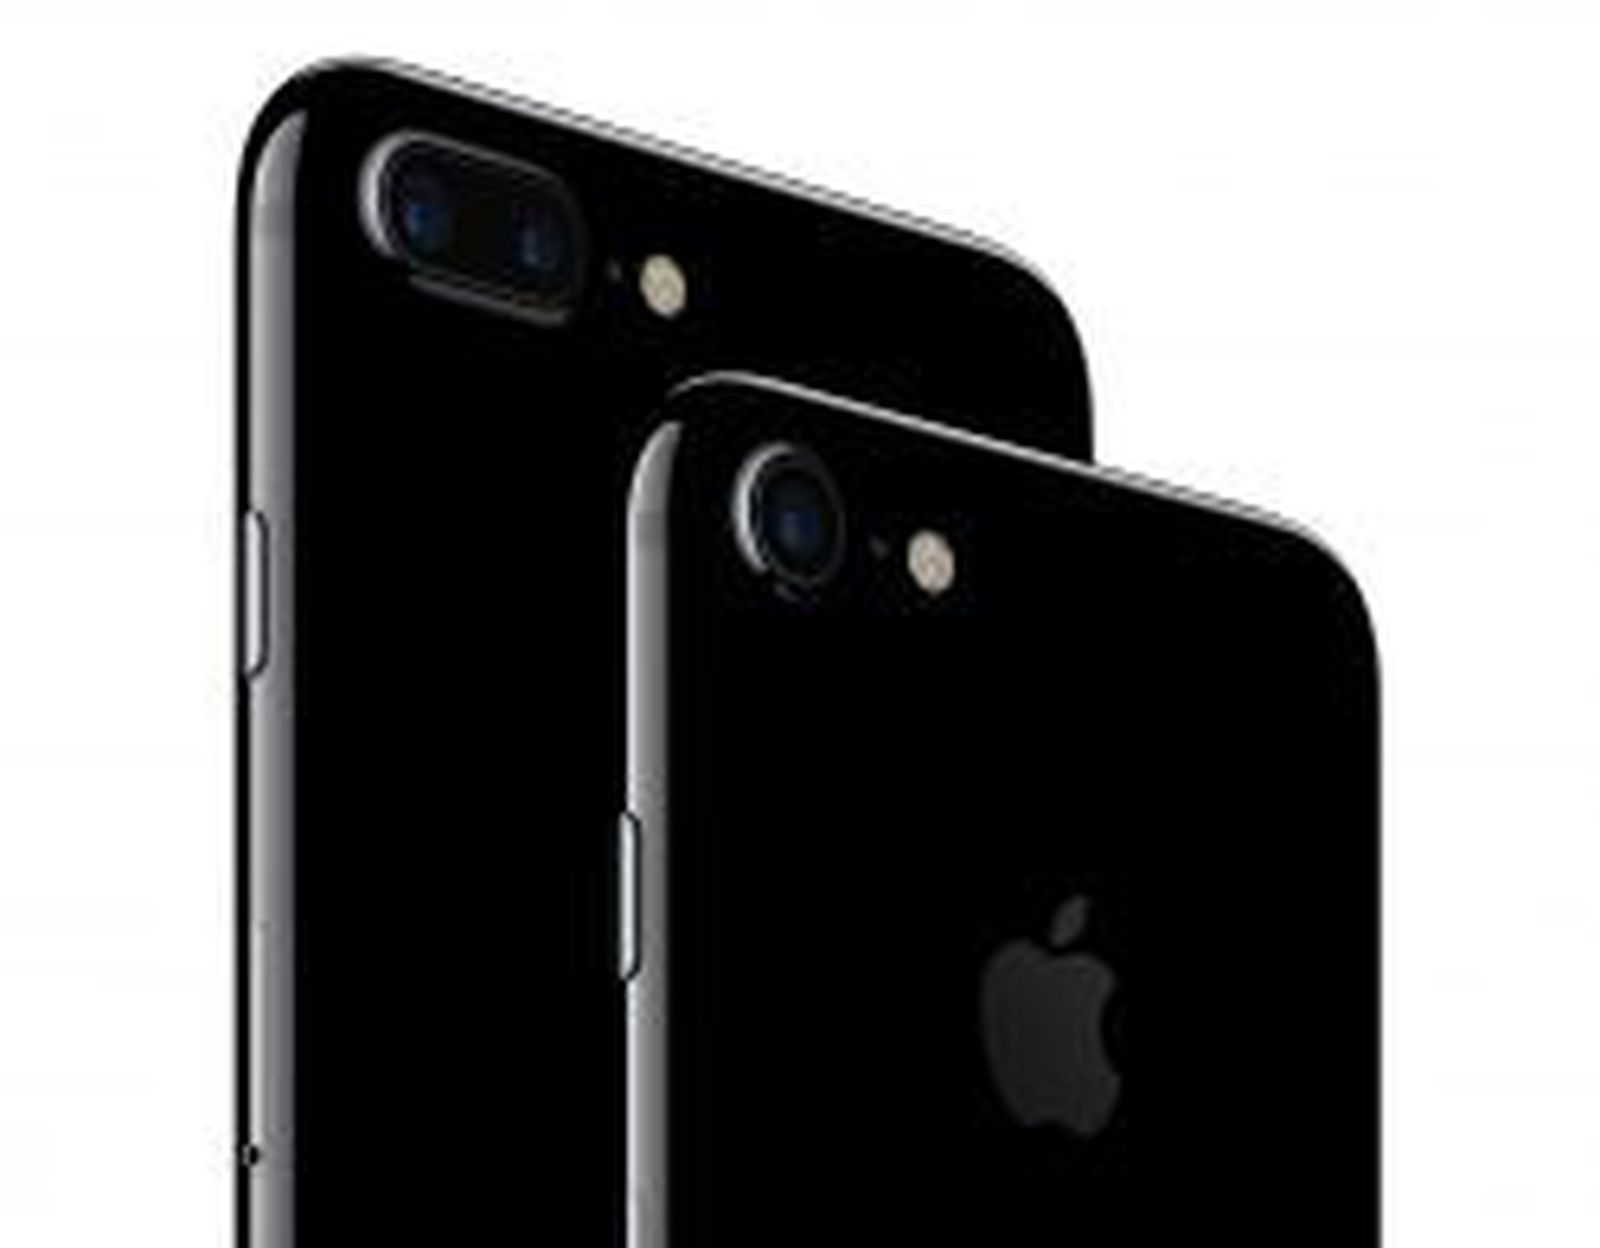 32GB Storage Option Now Available for iPhone 7 in Jet Black Color